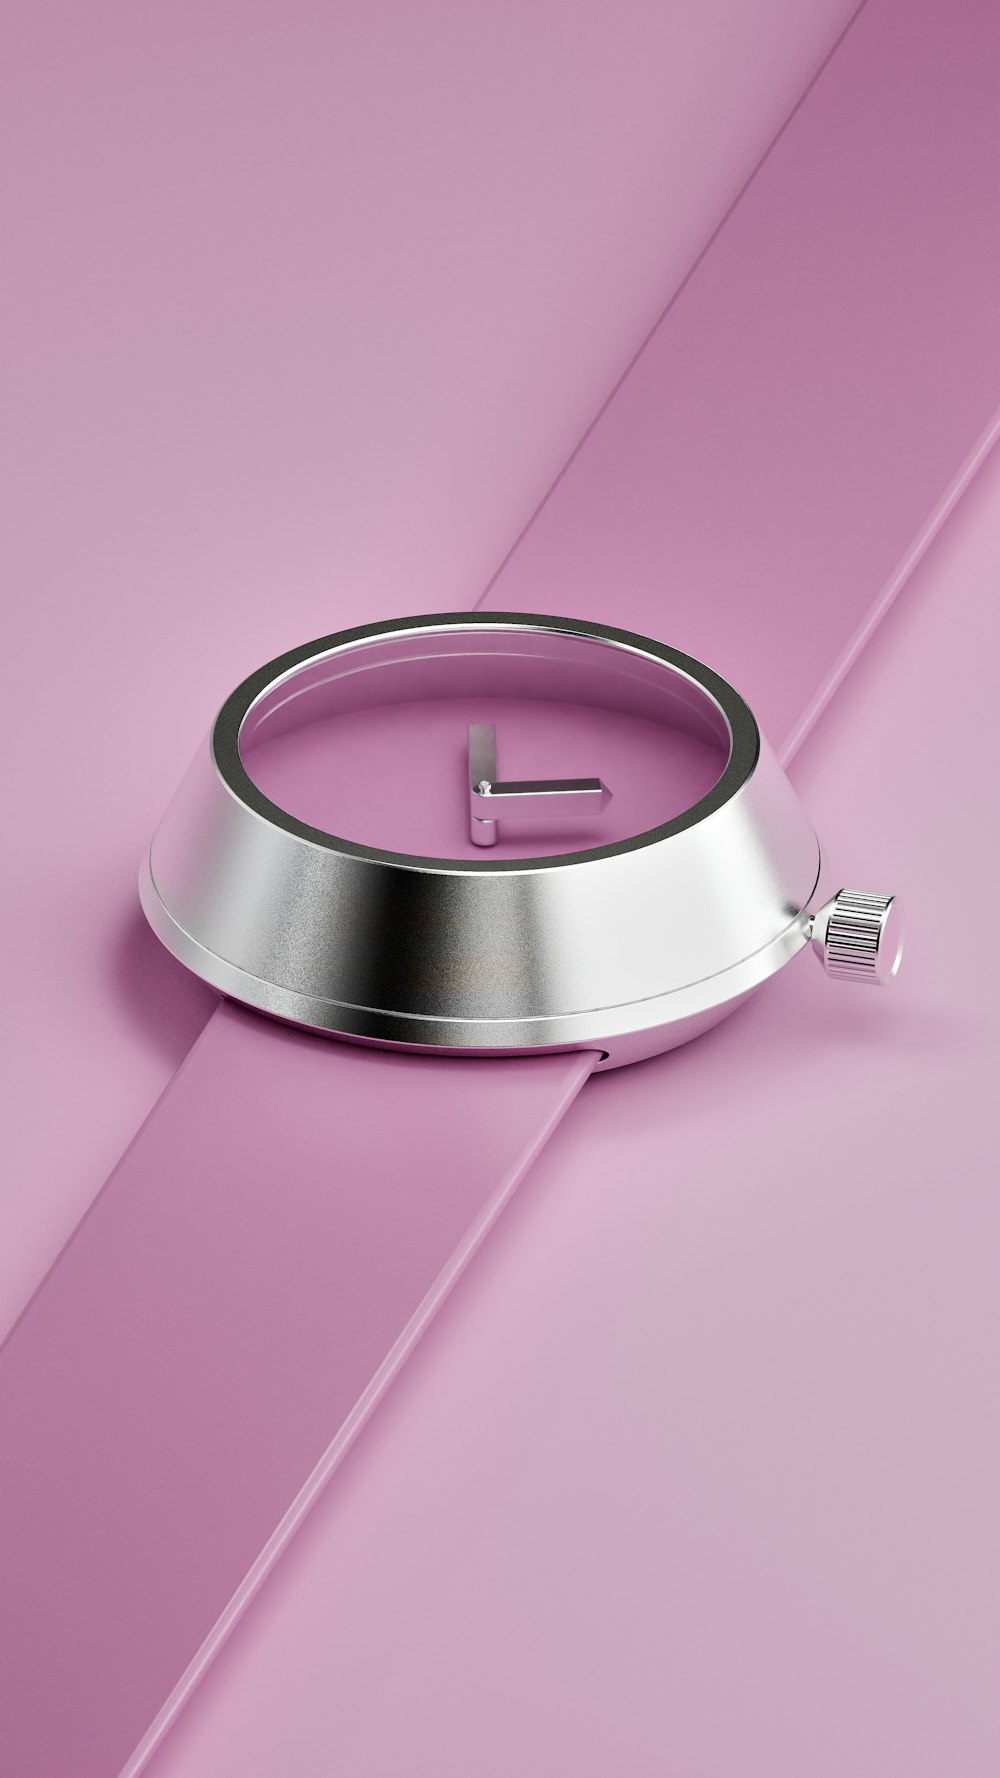 a metal object on a pink background